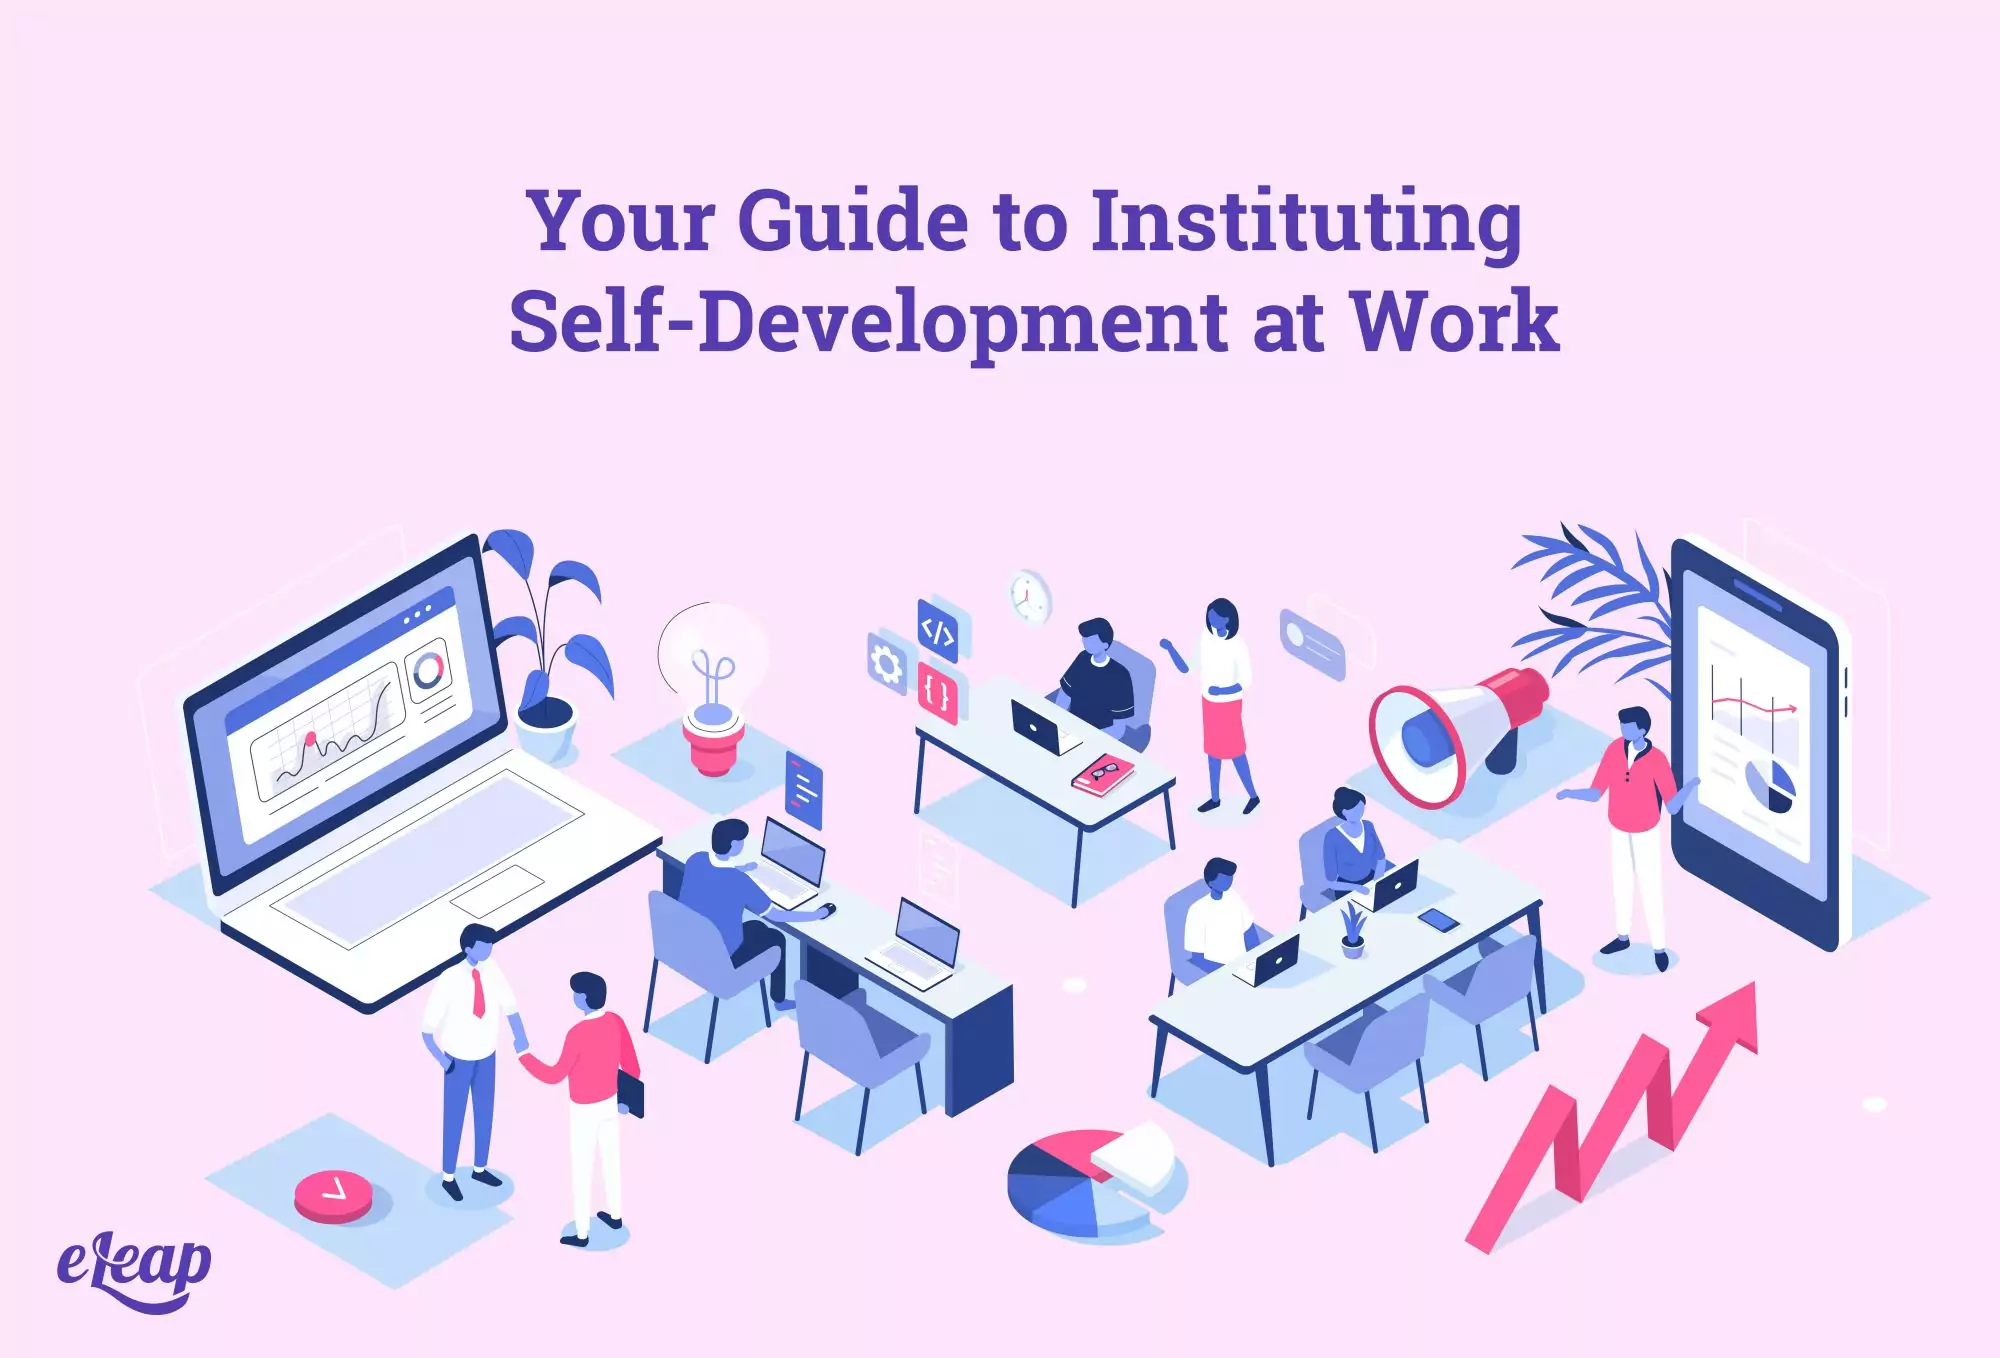 Your Guide to Instituting Self-Development at Work